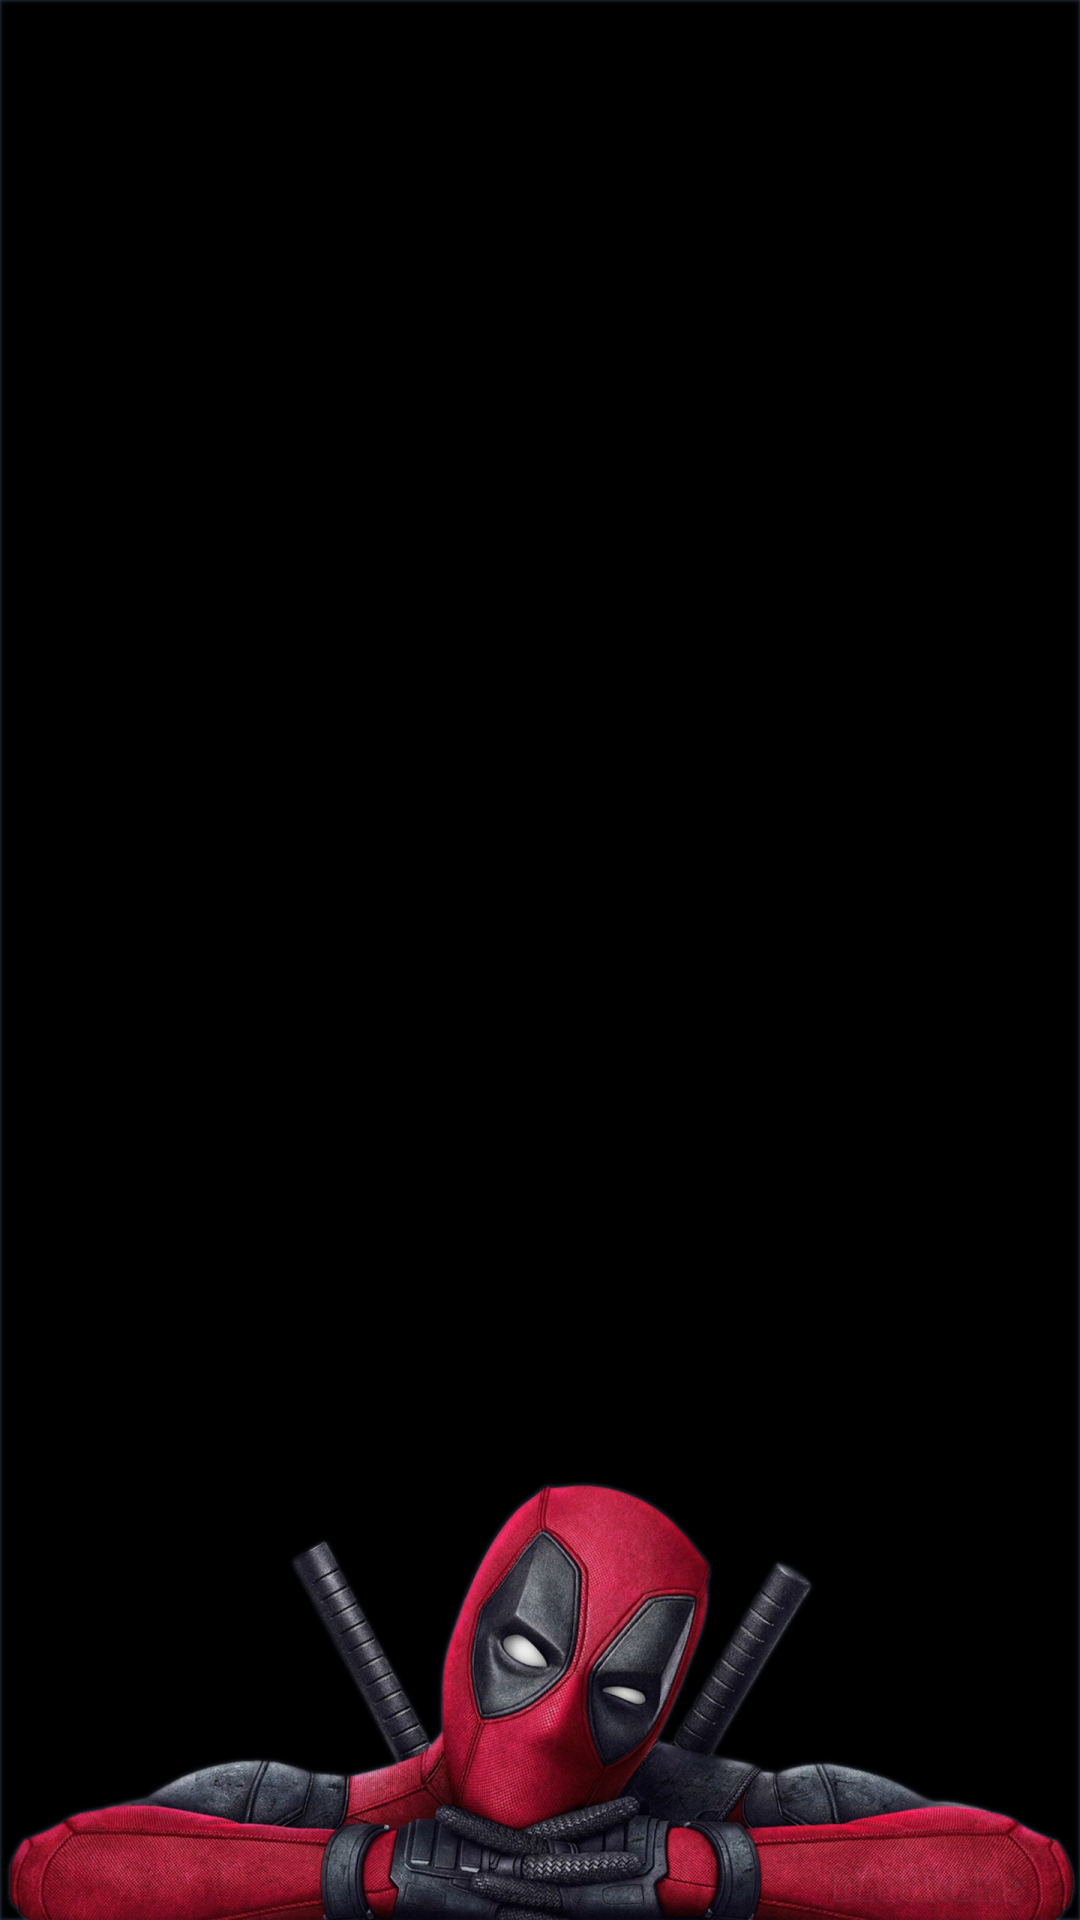 This Deadpool wallpapers for OLED phones is super nice on my iPhone